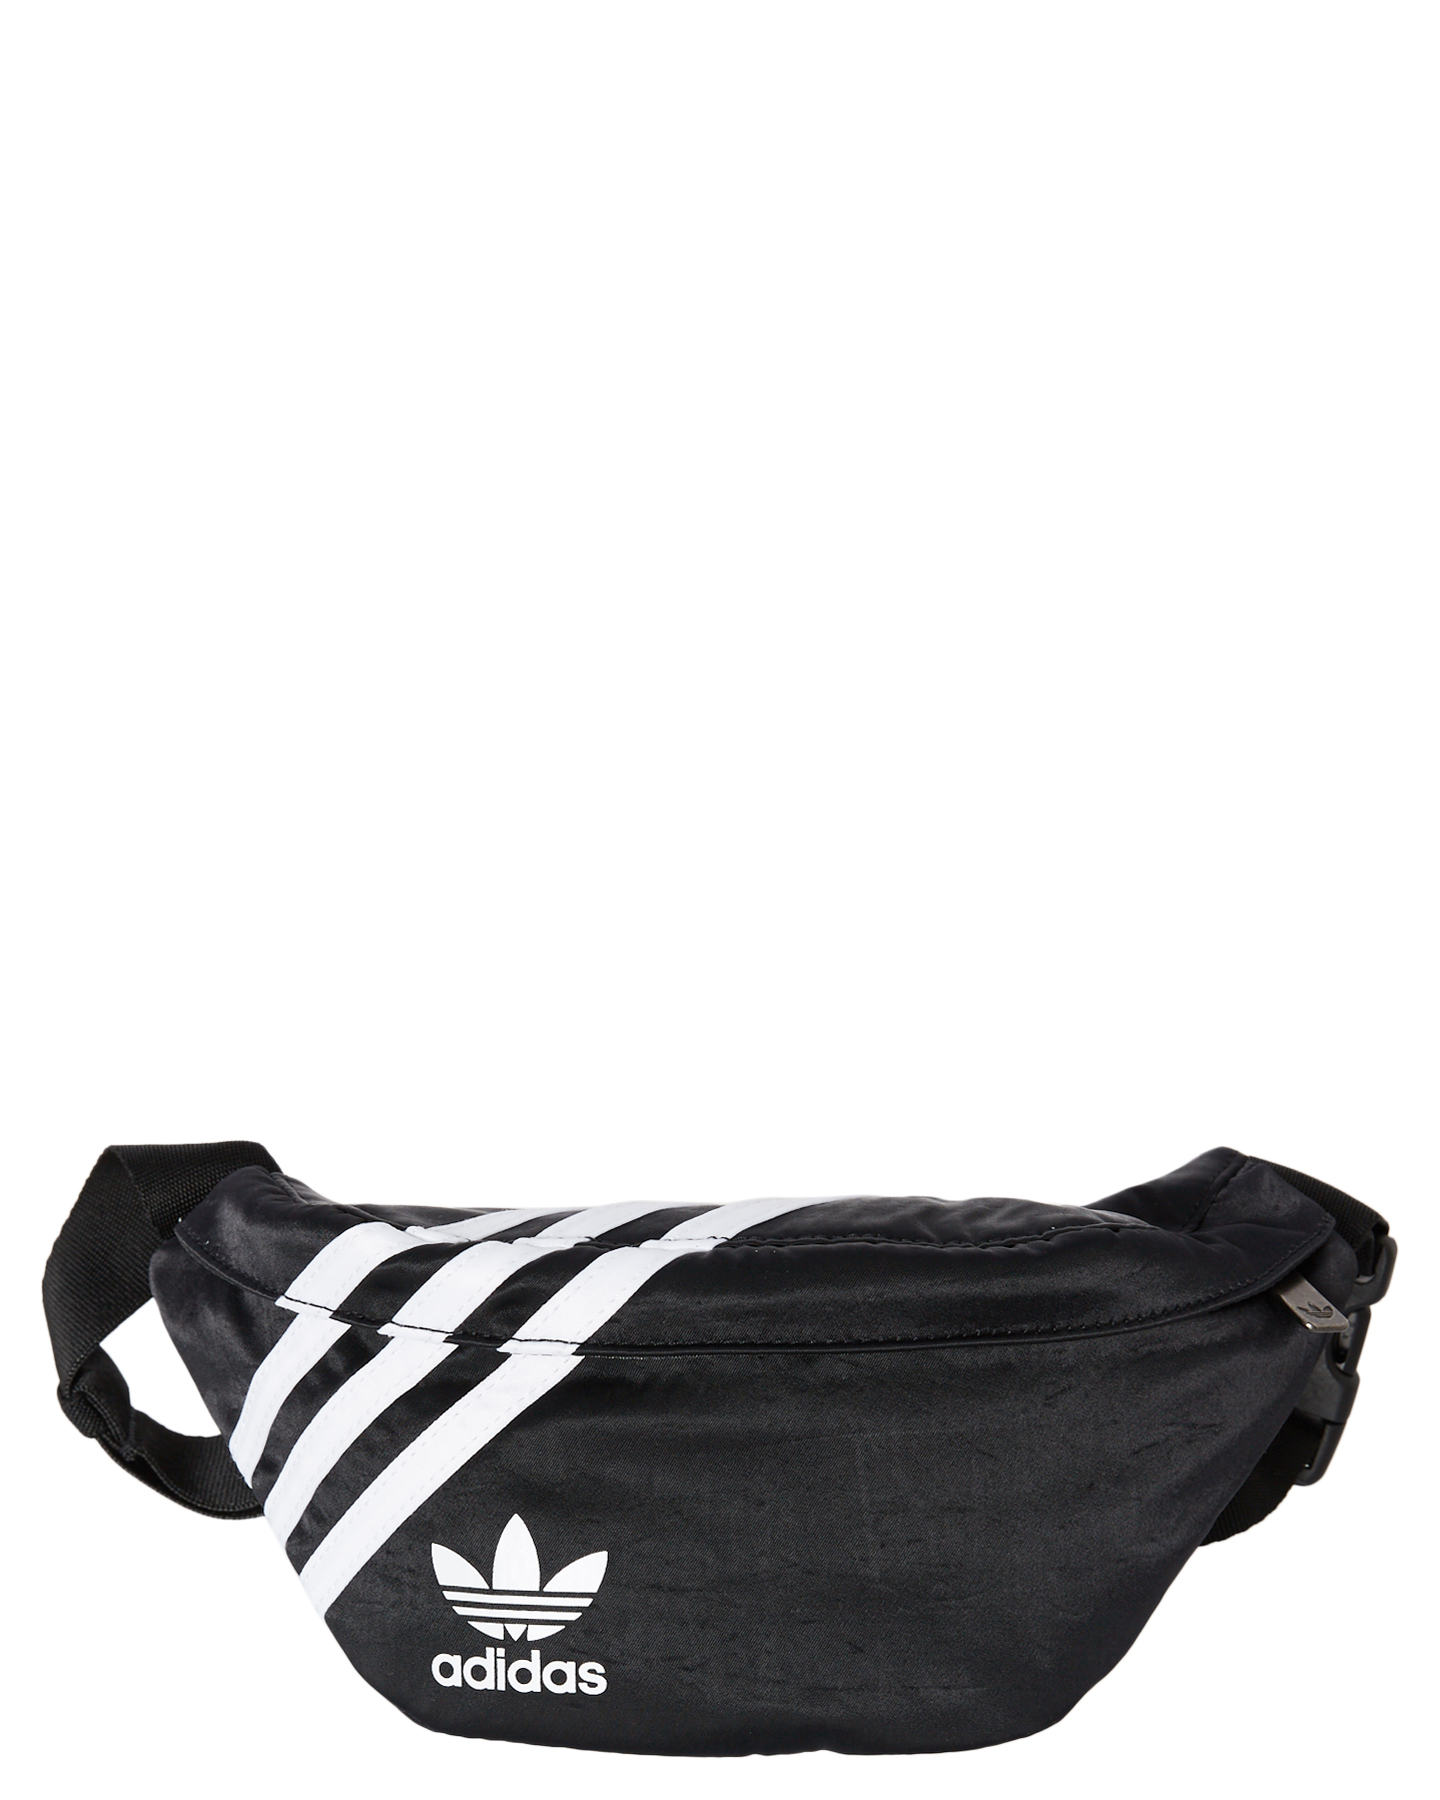 black and white adidas fanny pack